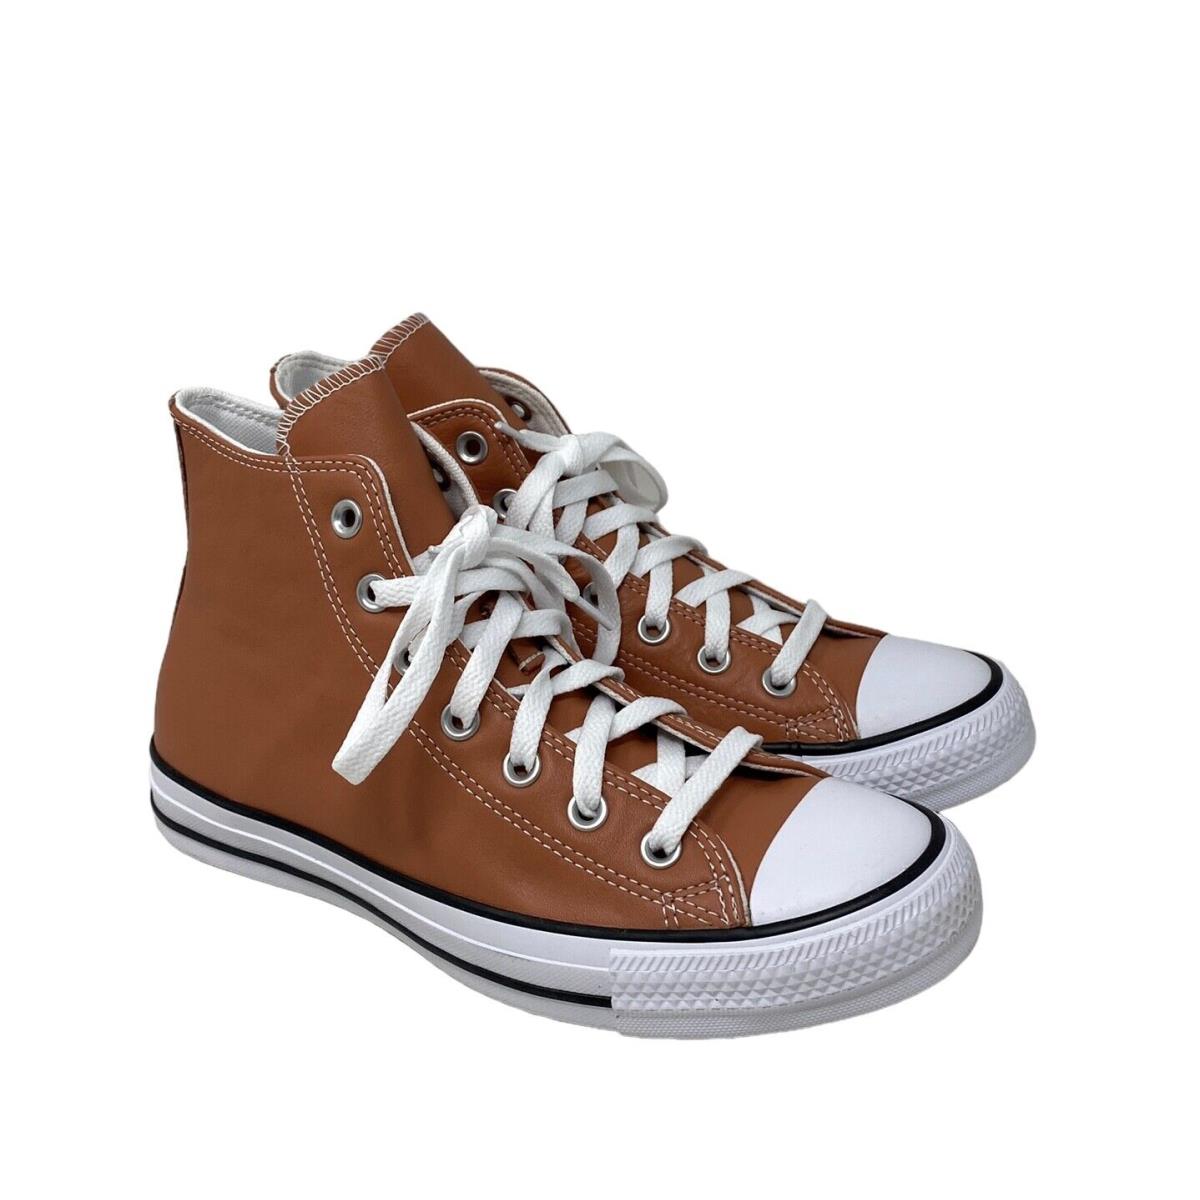 Converse Chuck Taylor High Leather Terra Blush Sneakers Women Size Shoes A09921C